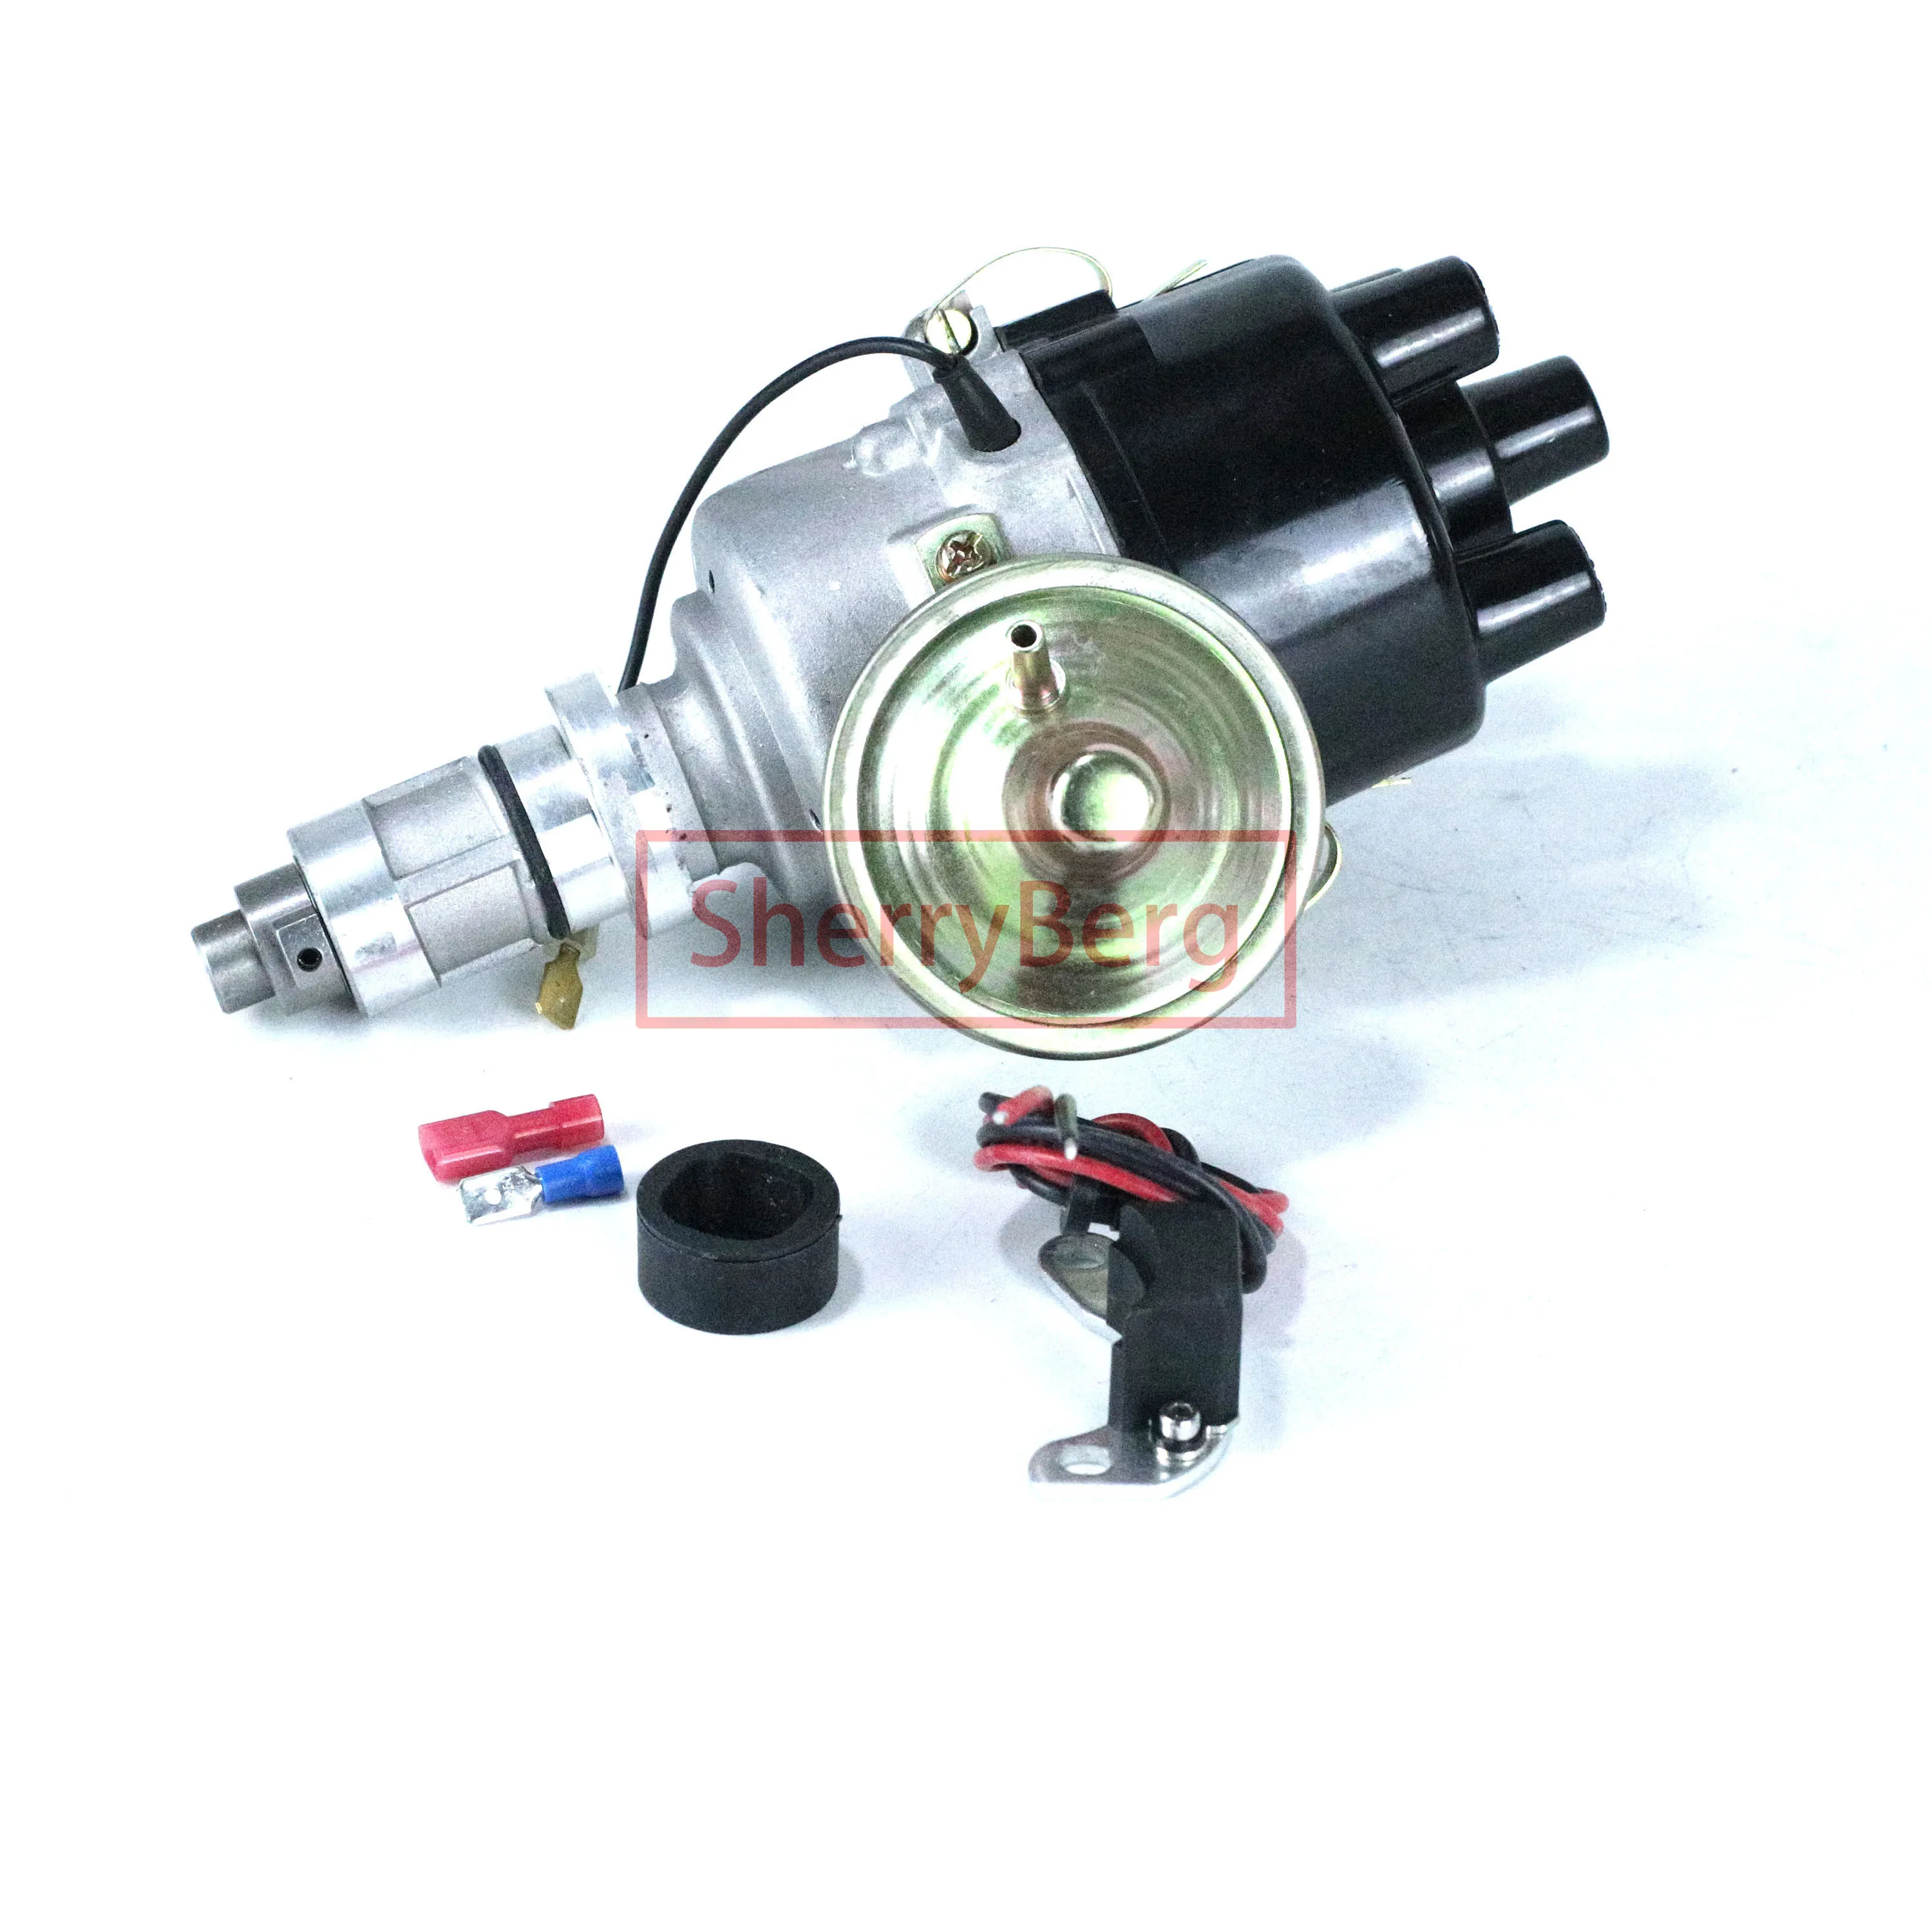 

SherryBerg Complete 4 Cyls 59D 4Cylinders 59D4 Lucas Type 41765 Distributor with Electronic Ignition For Mini 1000cc Model 1980S